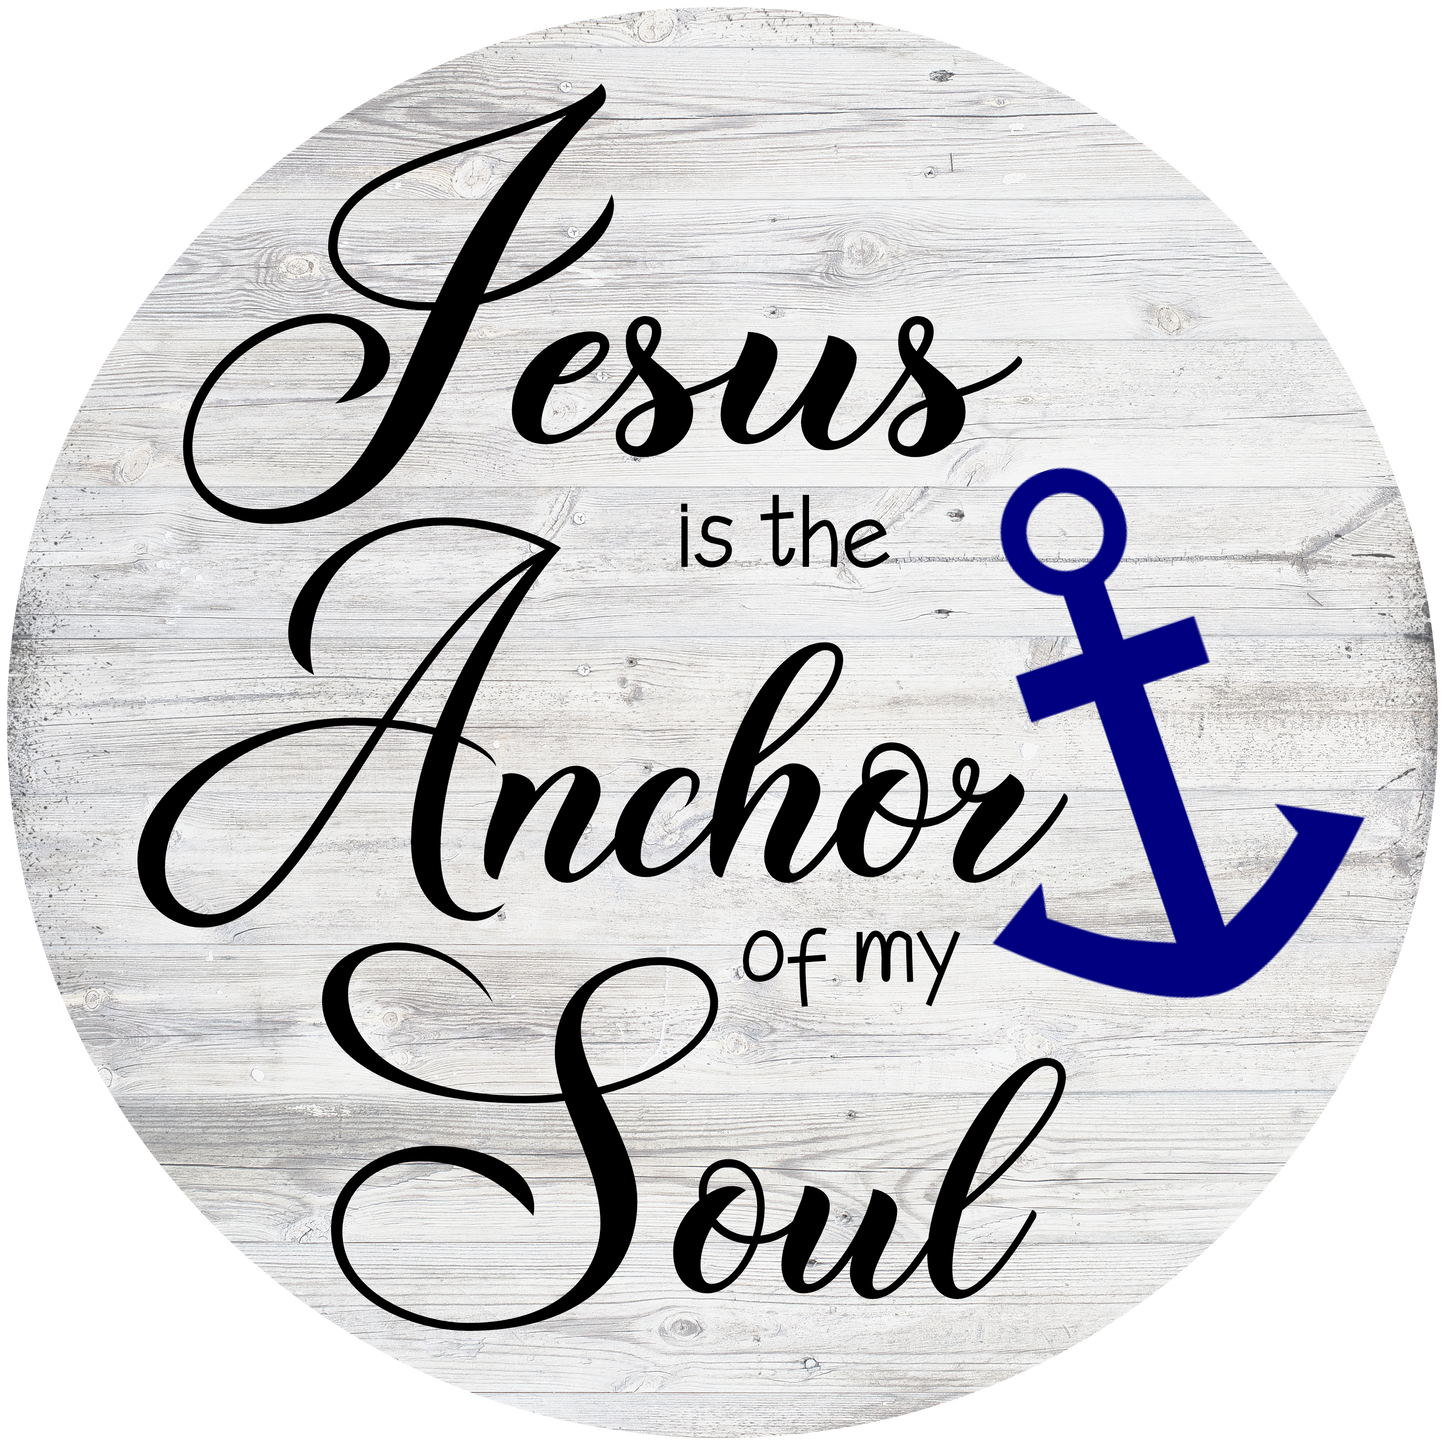 Jesus is the Anchor Round